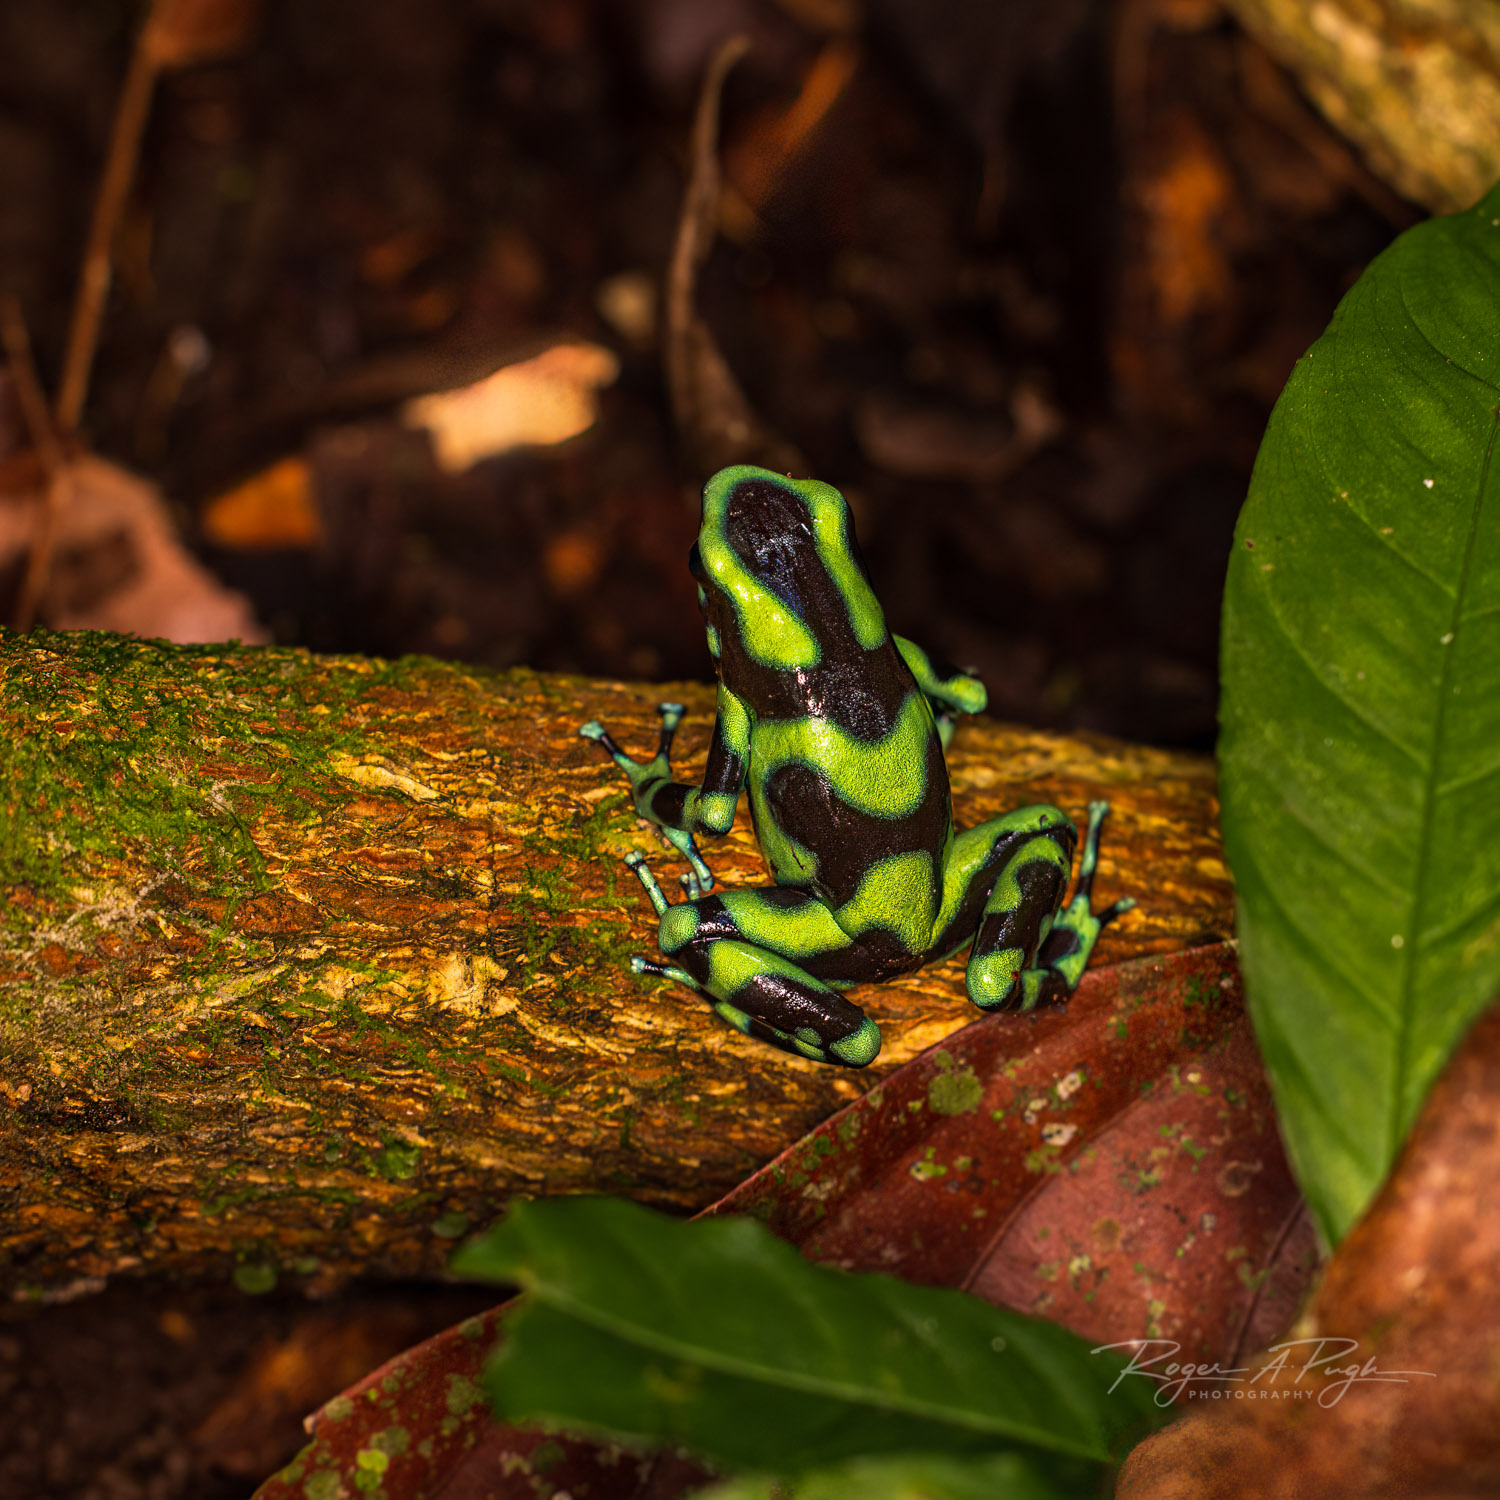 This is the Green and Black Poison Dart frog. My guide on this evenings hunt was very nervous that I was getting a bit too close...